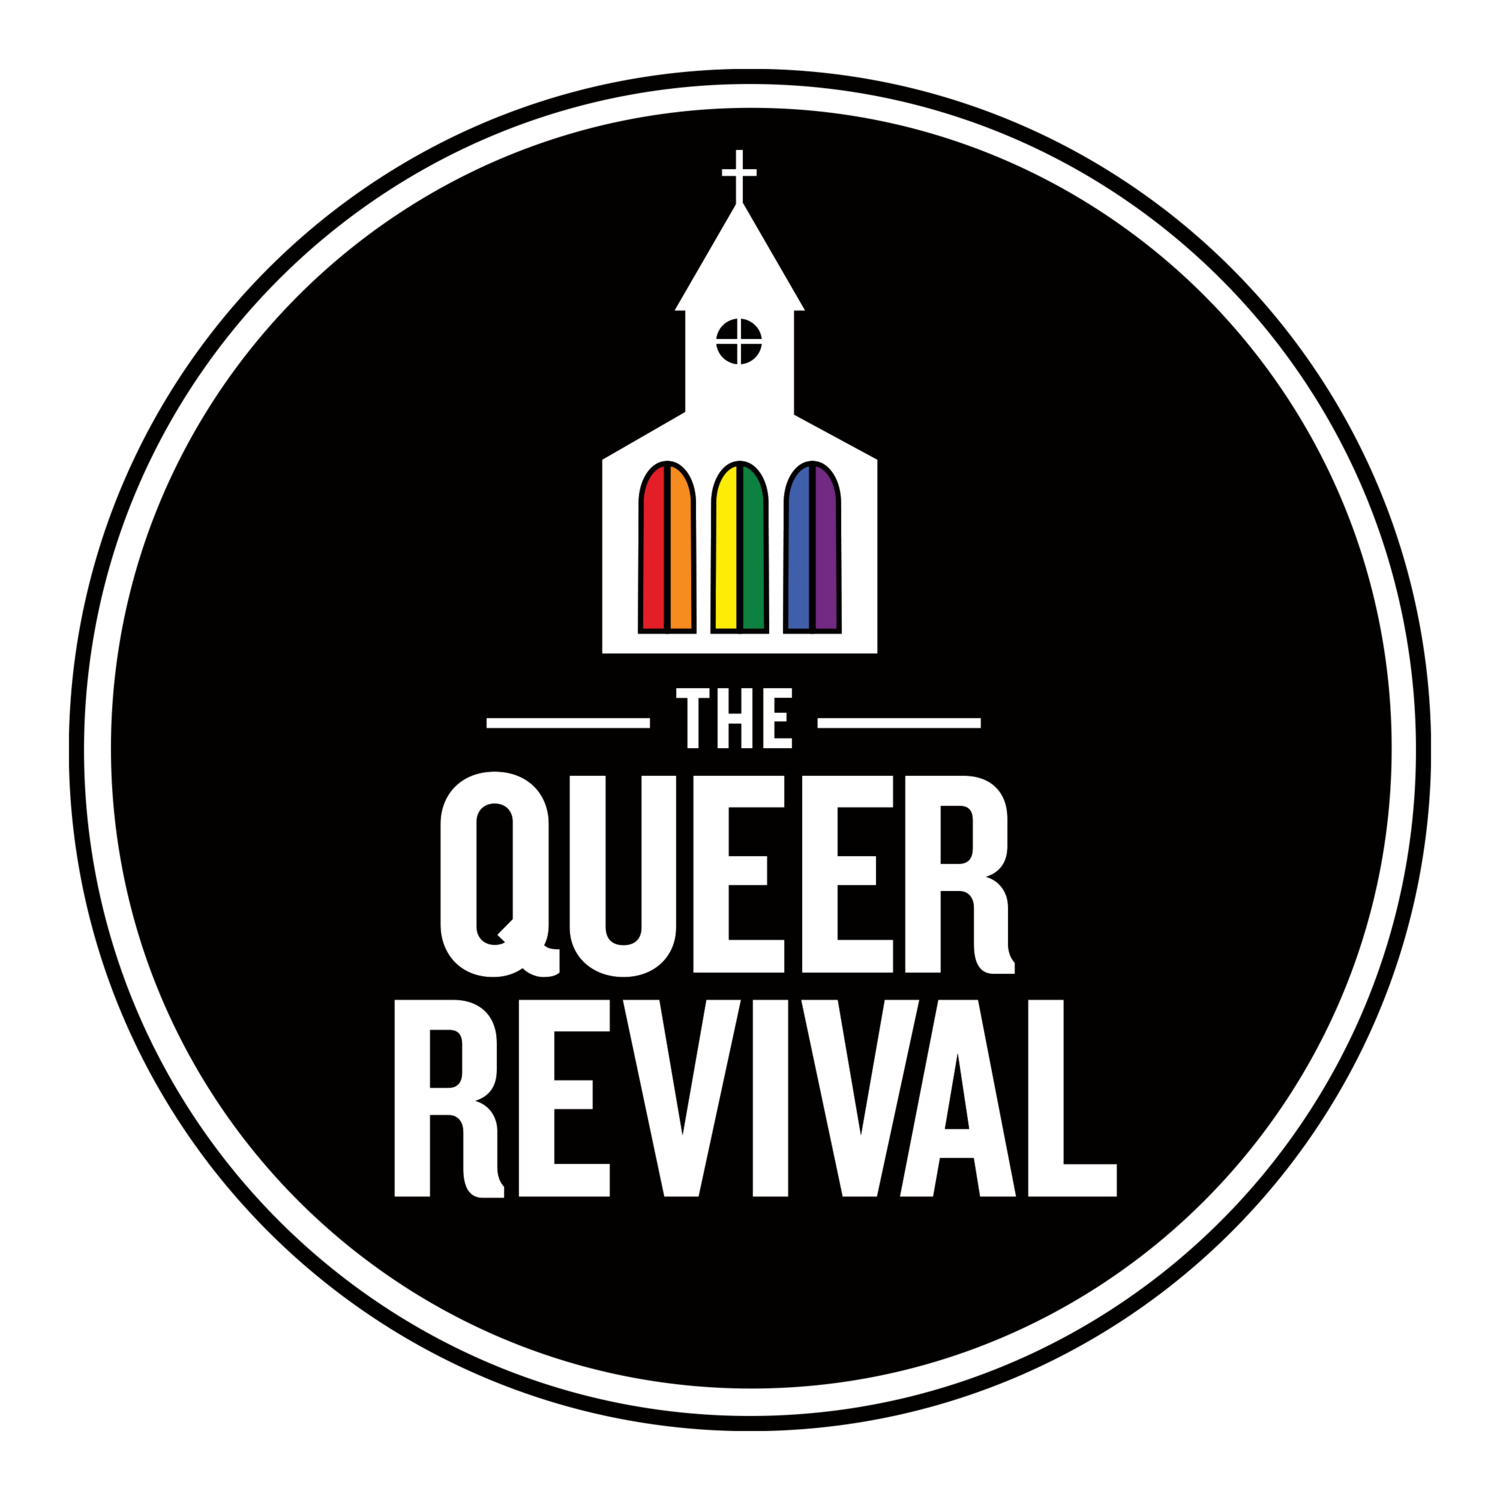 The Queer Revival